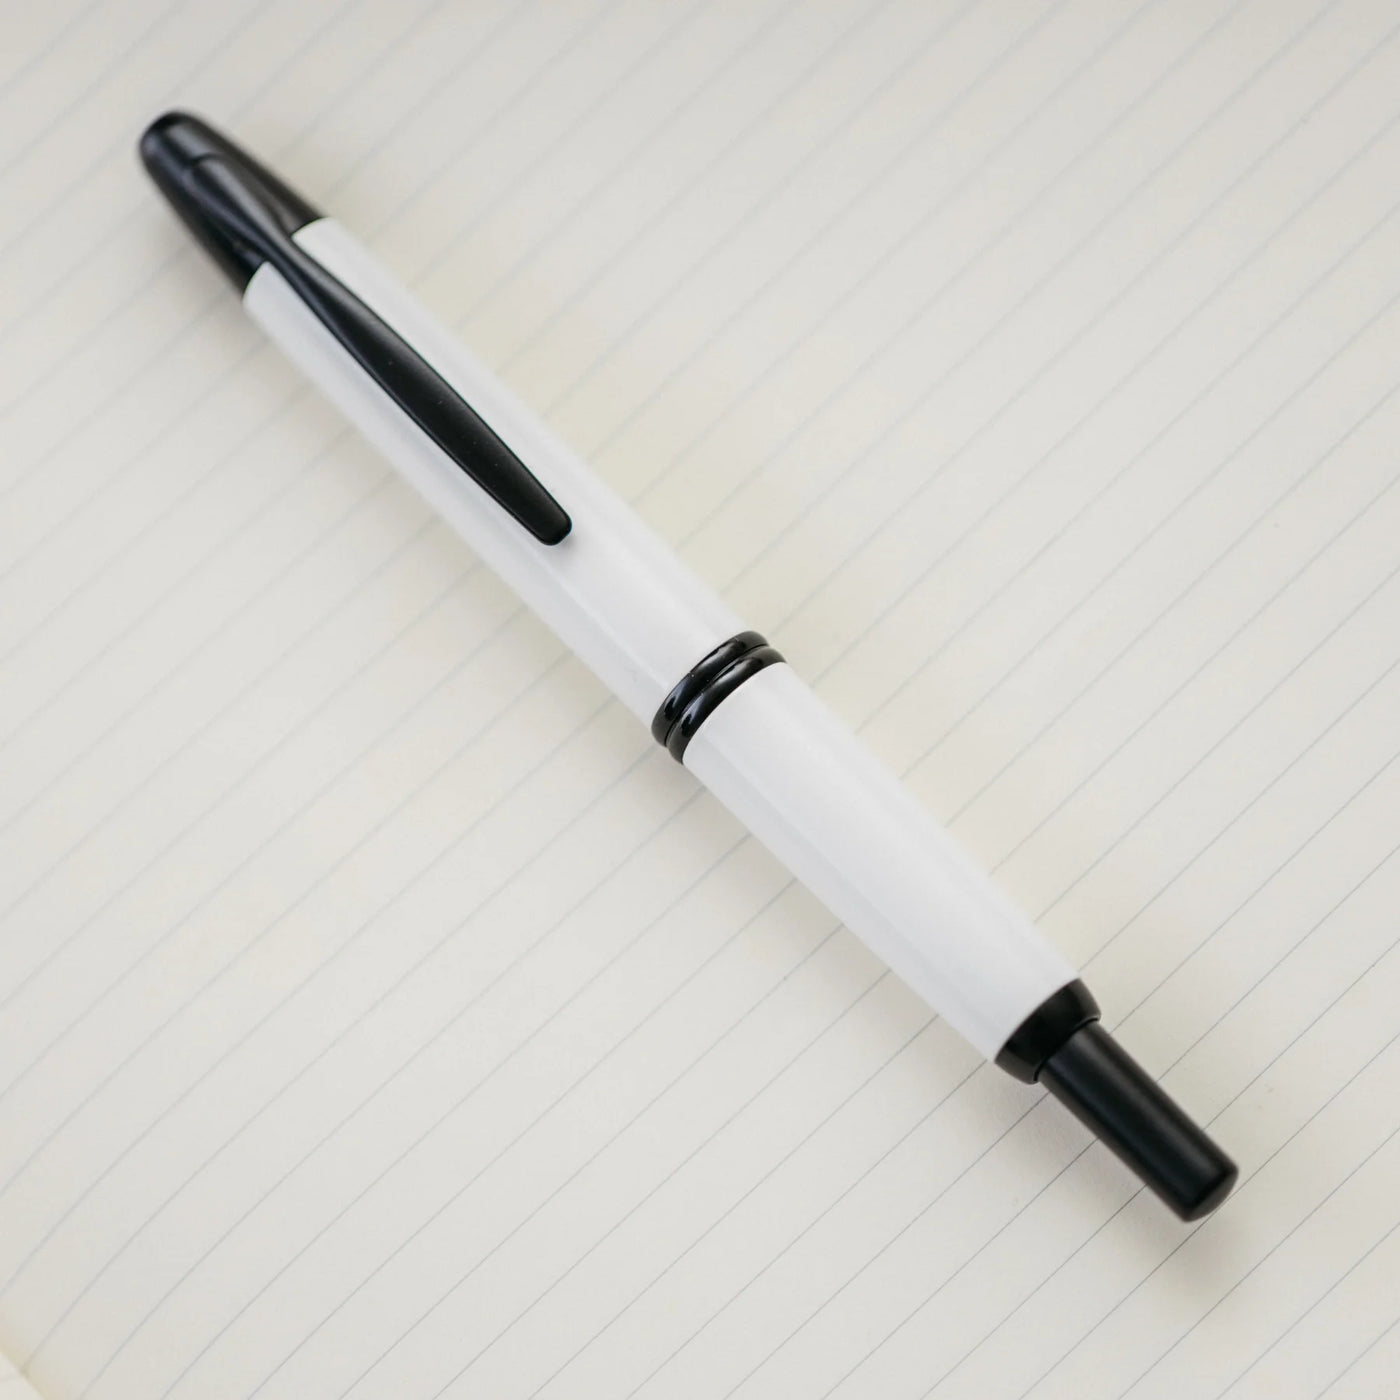 The 9 Best Journaling Pens of 2022